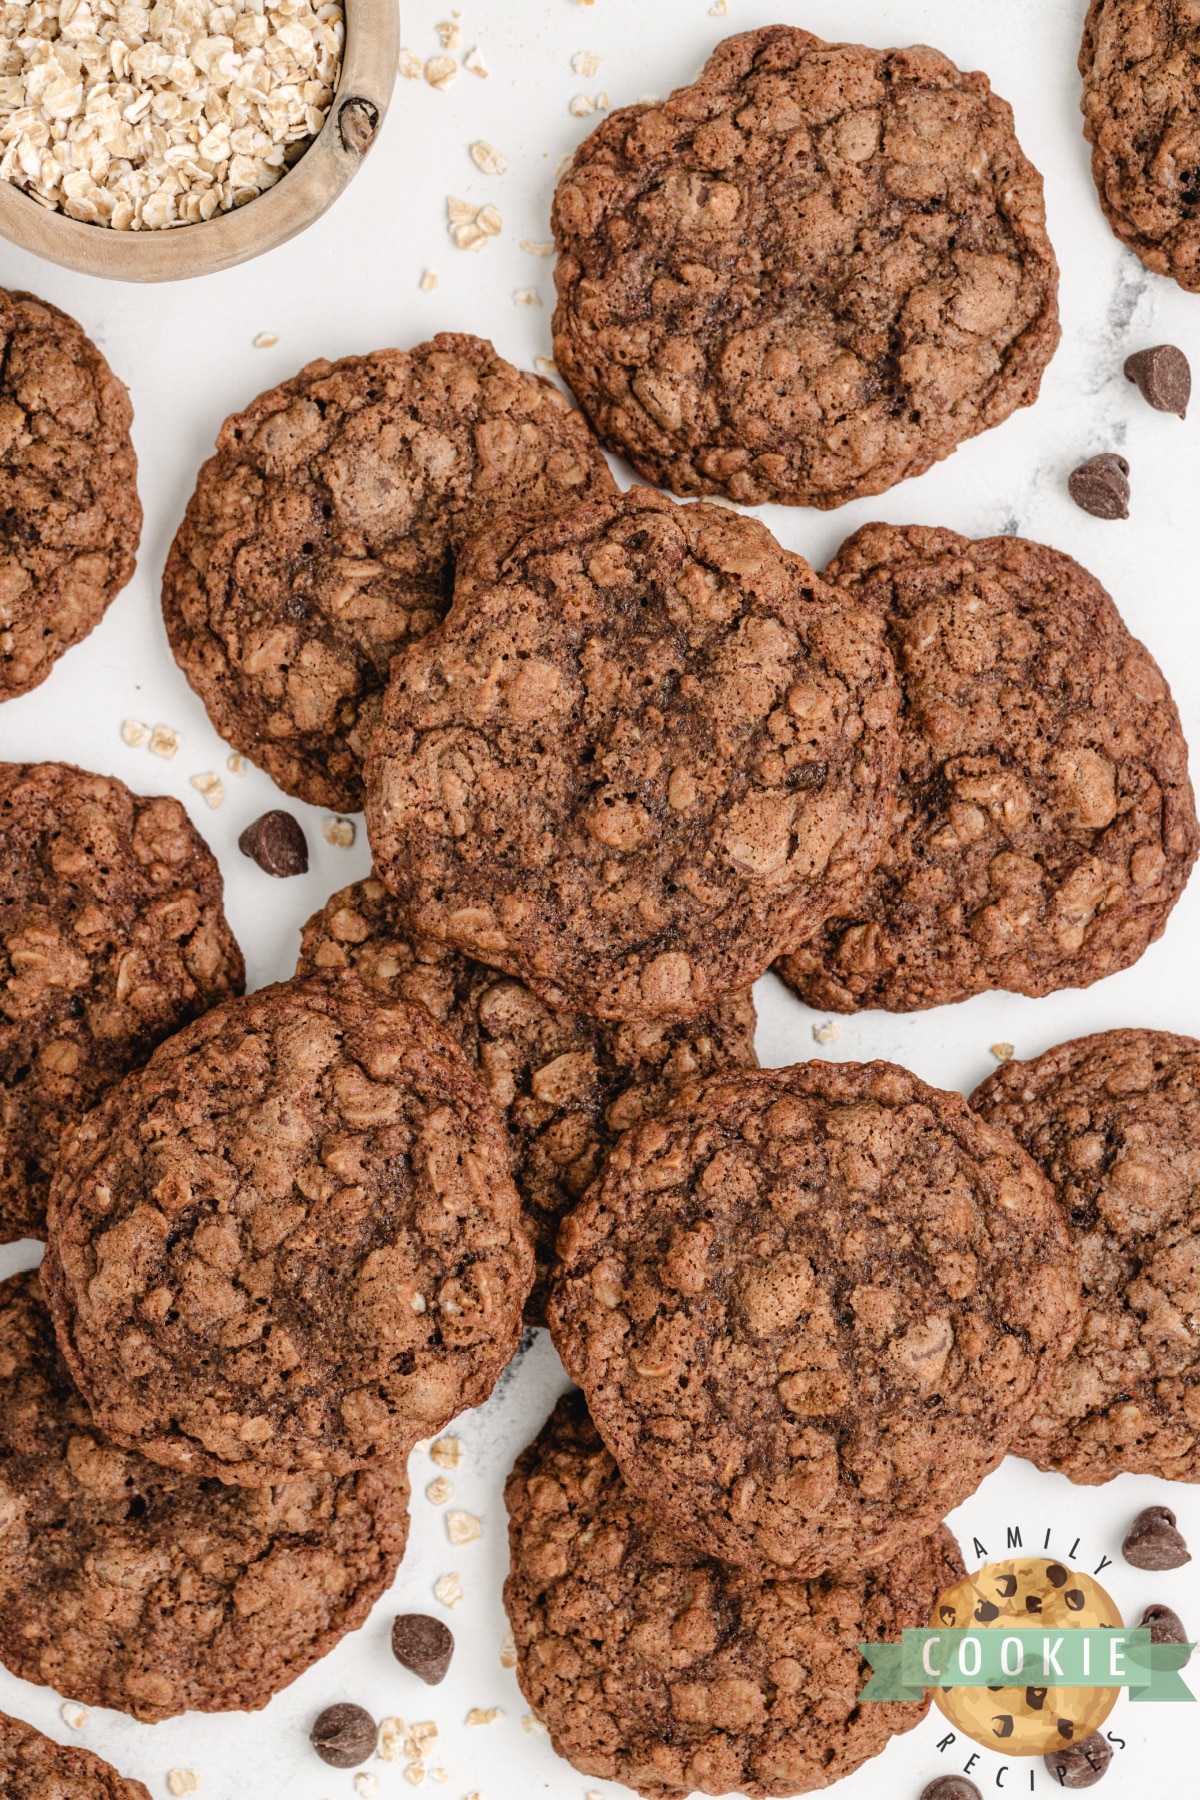 Chocolate cookies with oats.